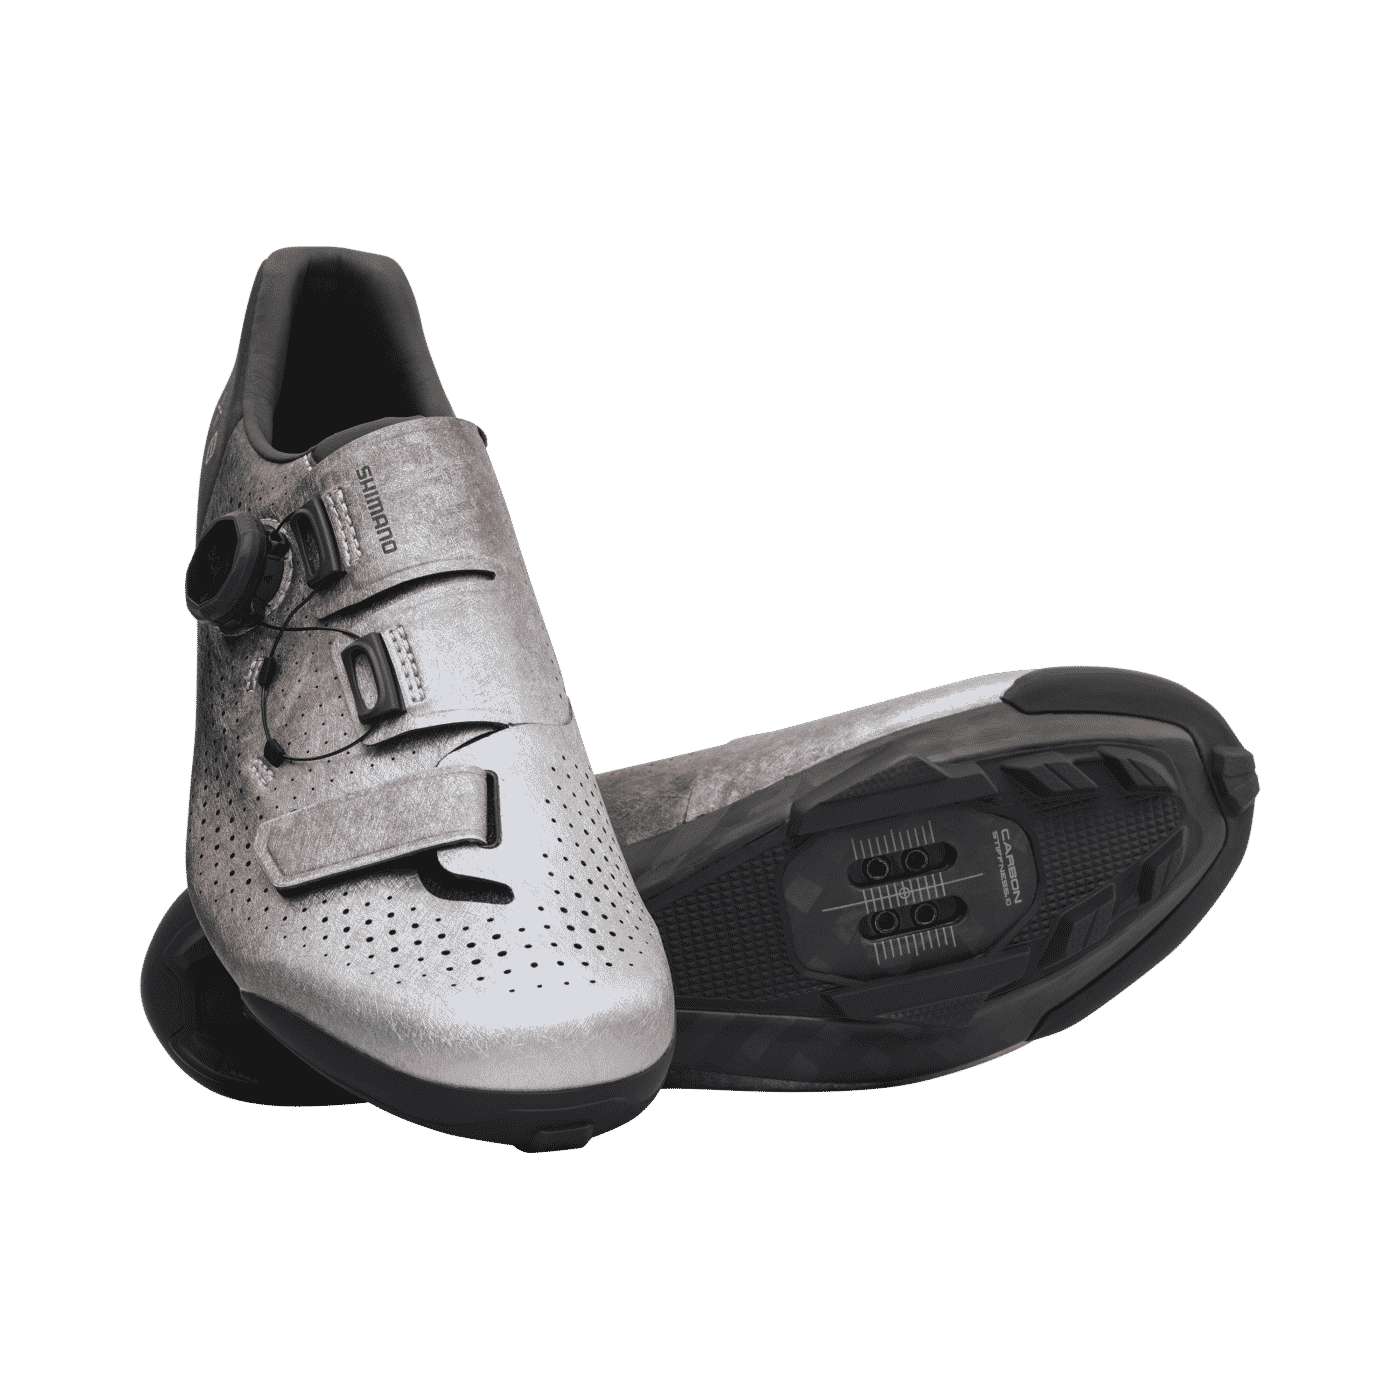 Chaussures-gravel-shimano-RX801 gris